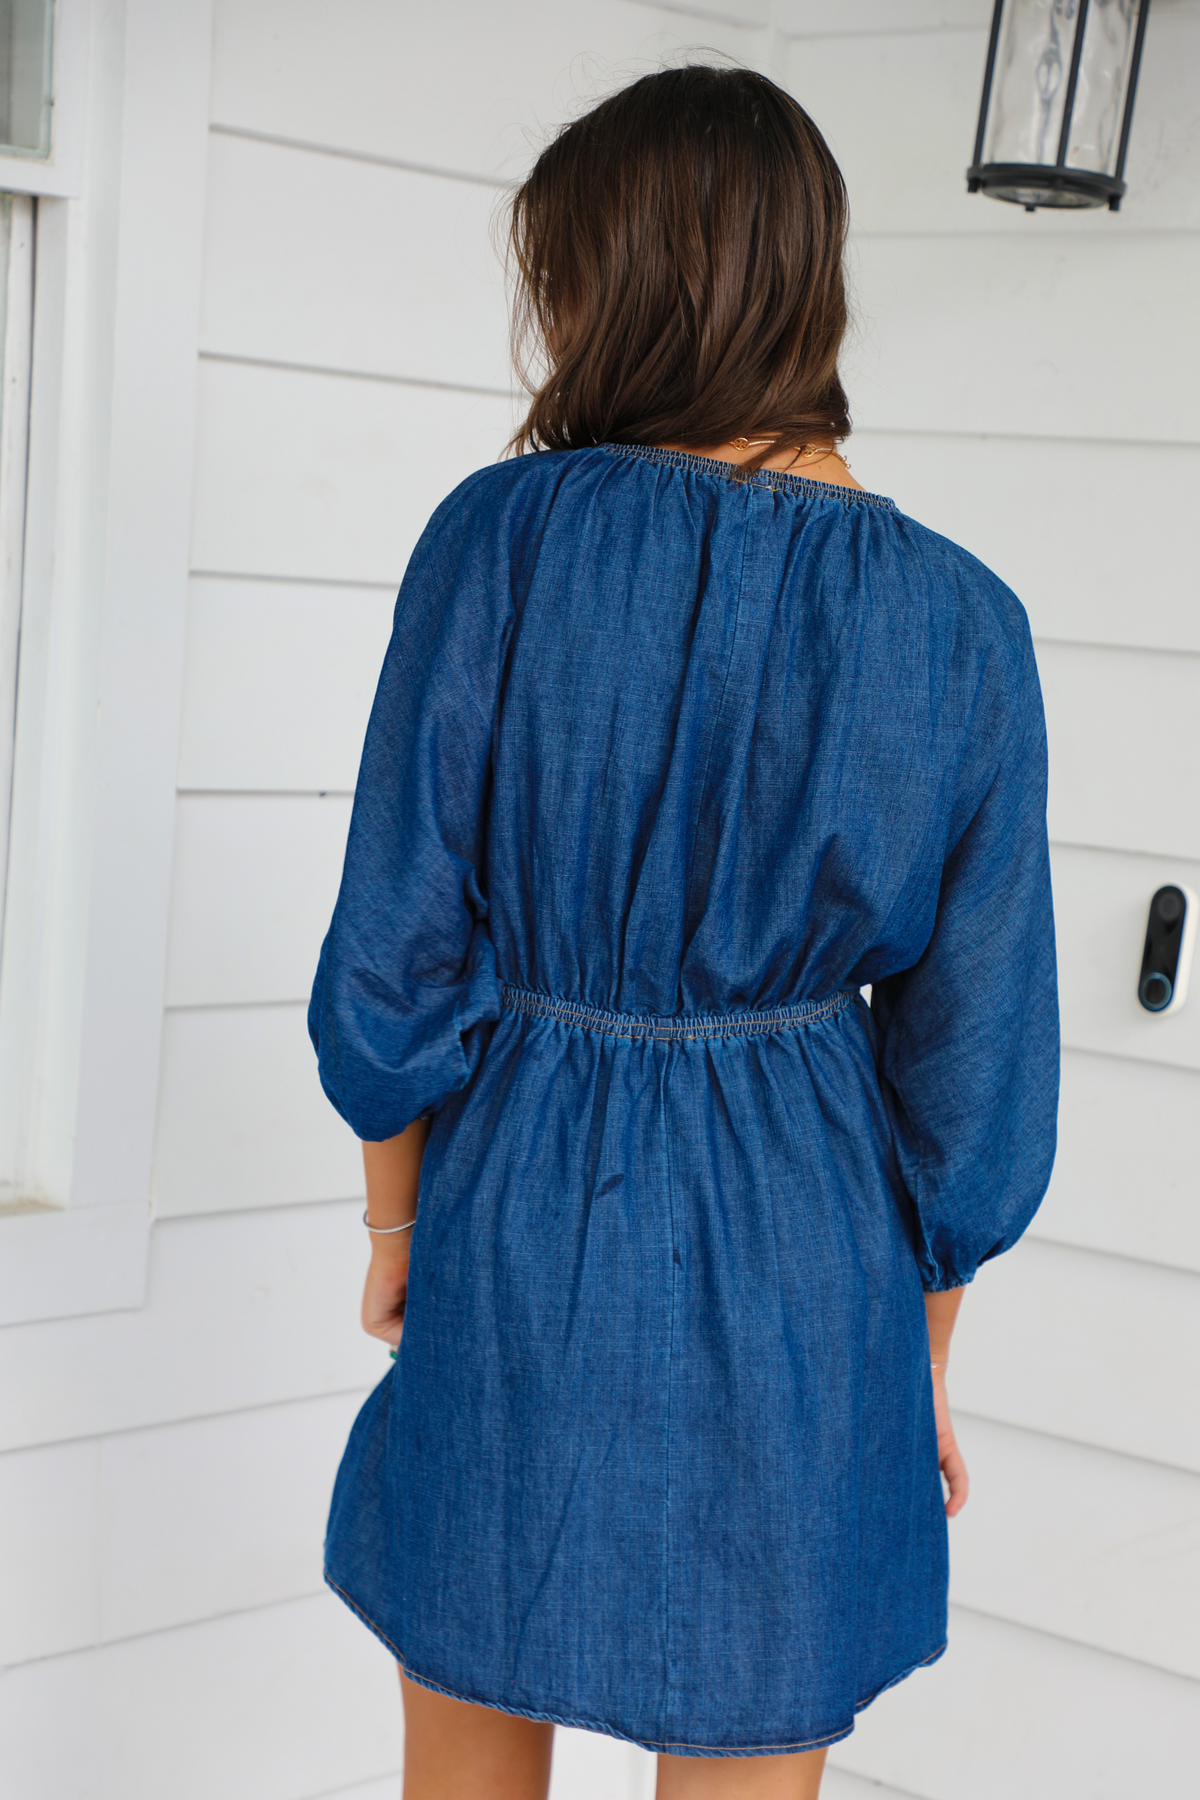 Dare To Be Different Dress: Denim